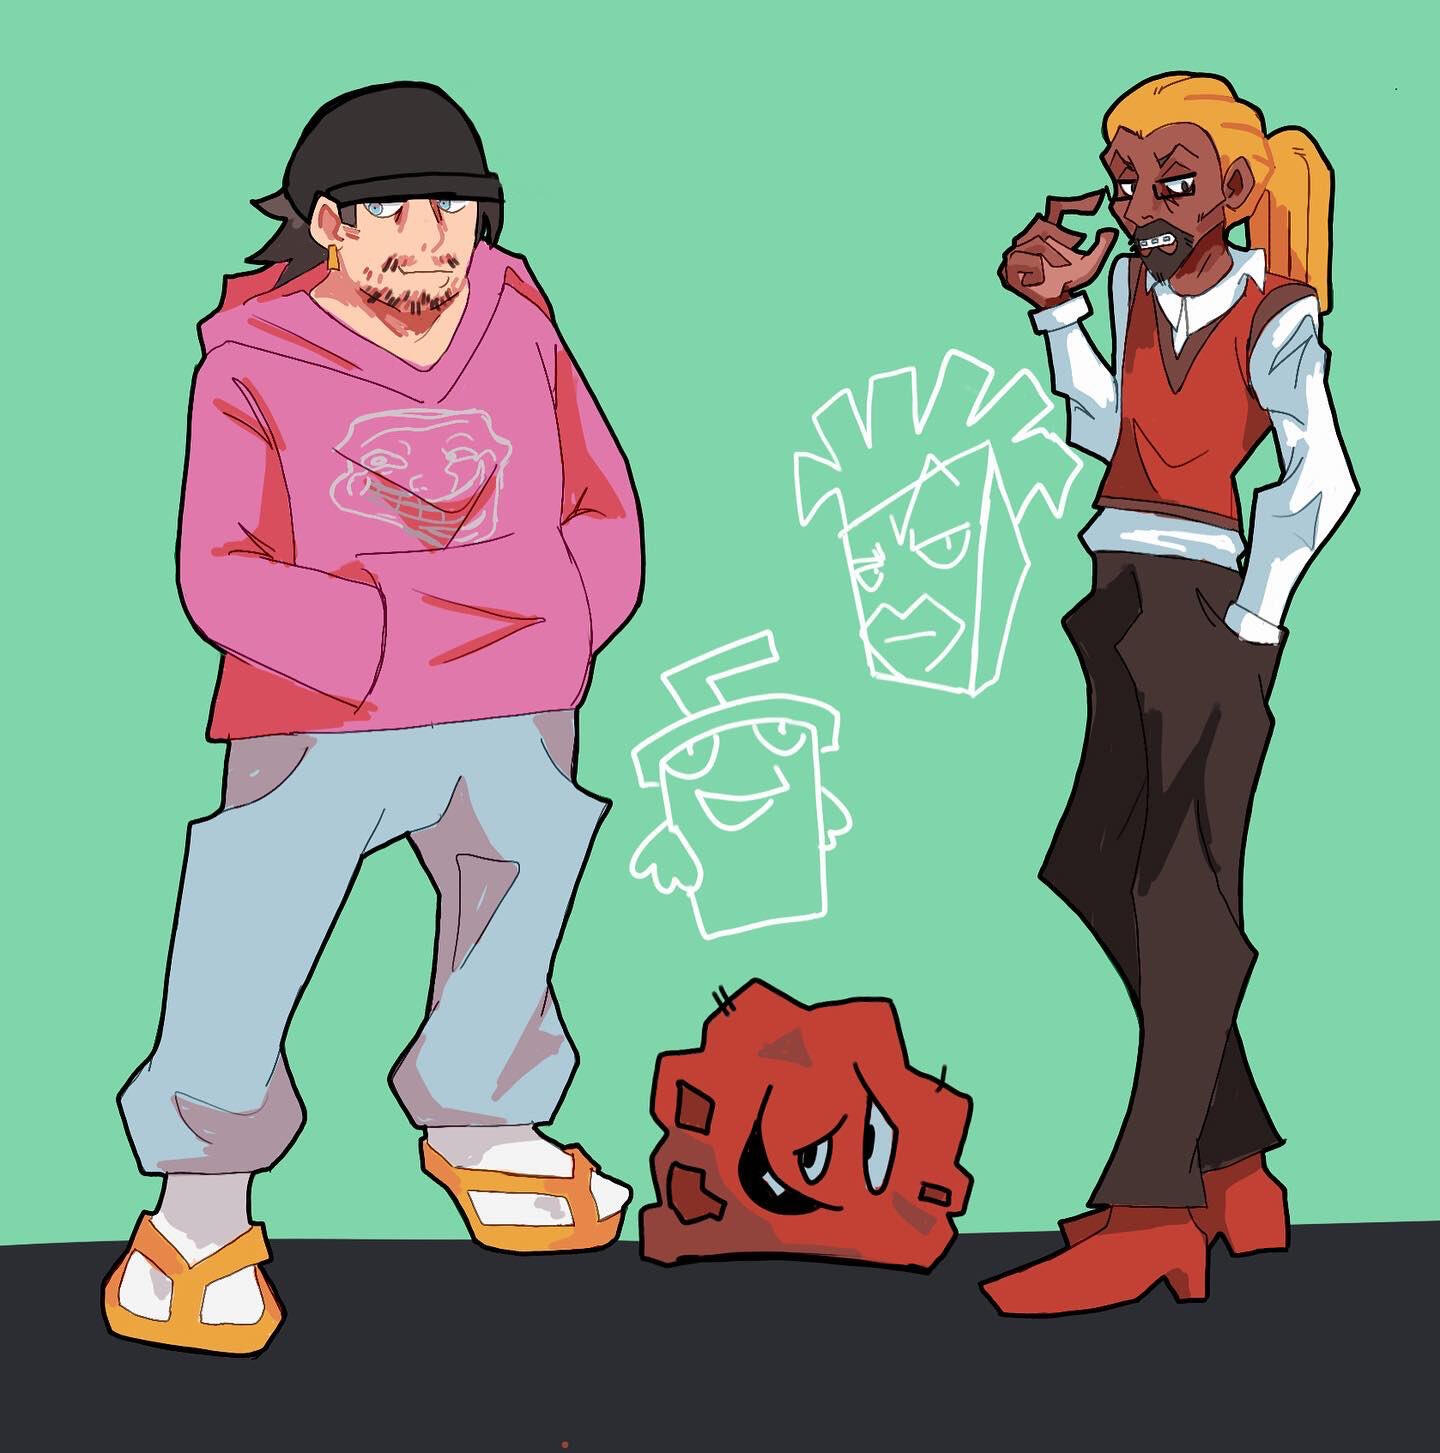 I designed human versions of the aqua teens for fun- ATHF is one of my favorite shows ever so I wanted to depict what I think the characters would look like realistically- except meatwad, of course. Done in 2022.